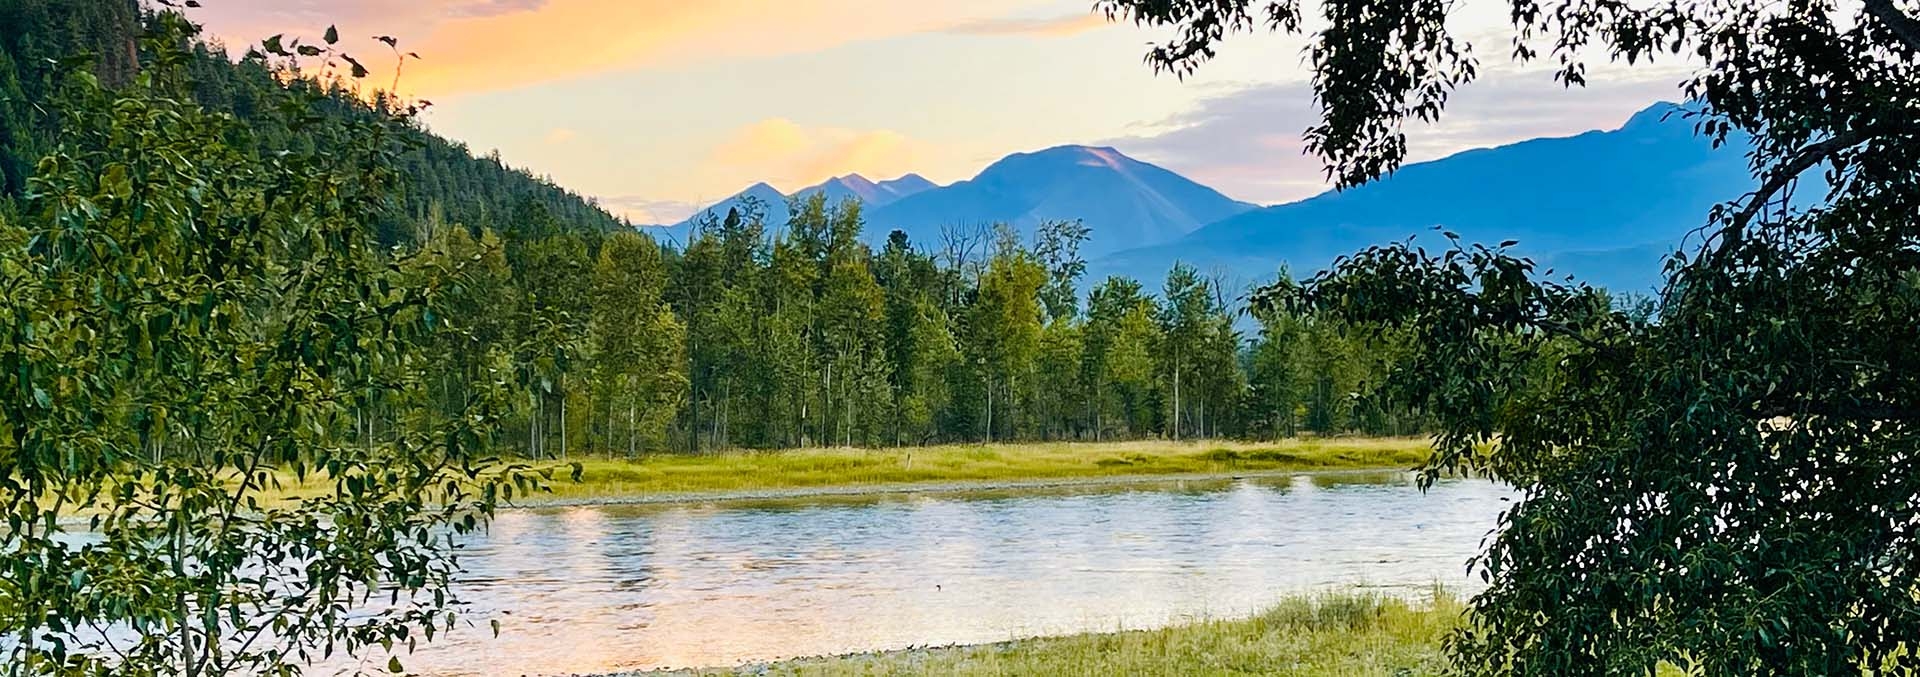 montana fishing property for sale cabinet view river camp